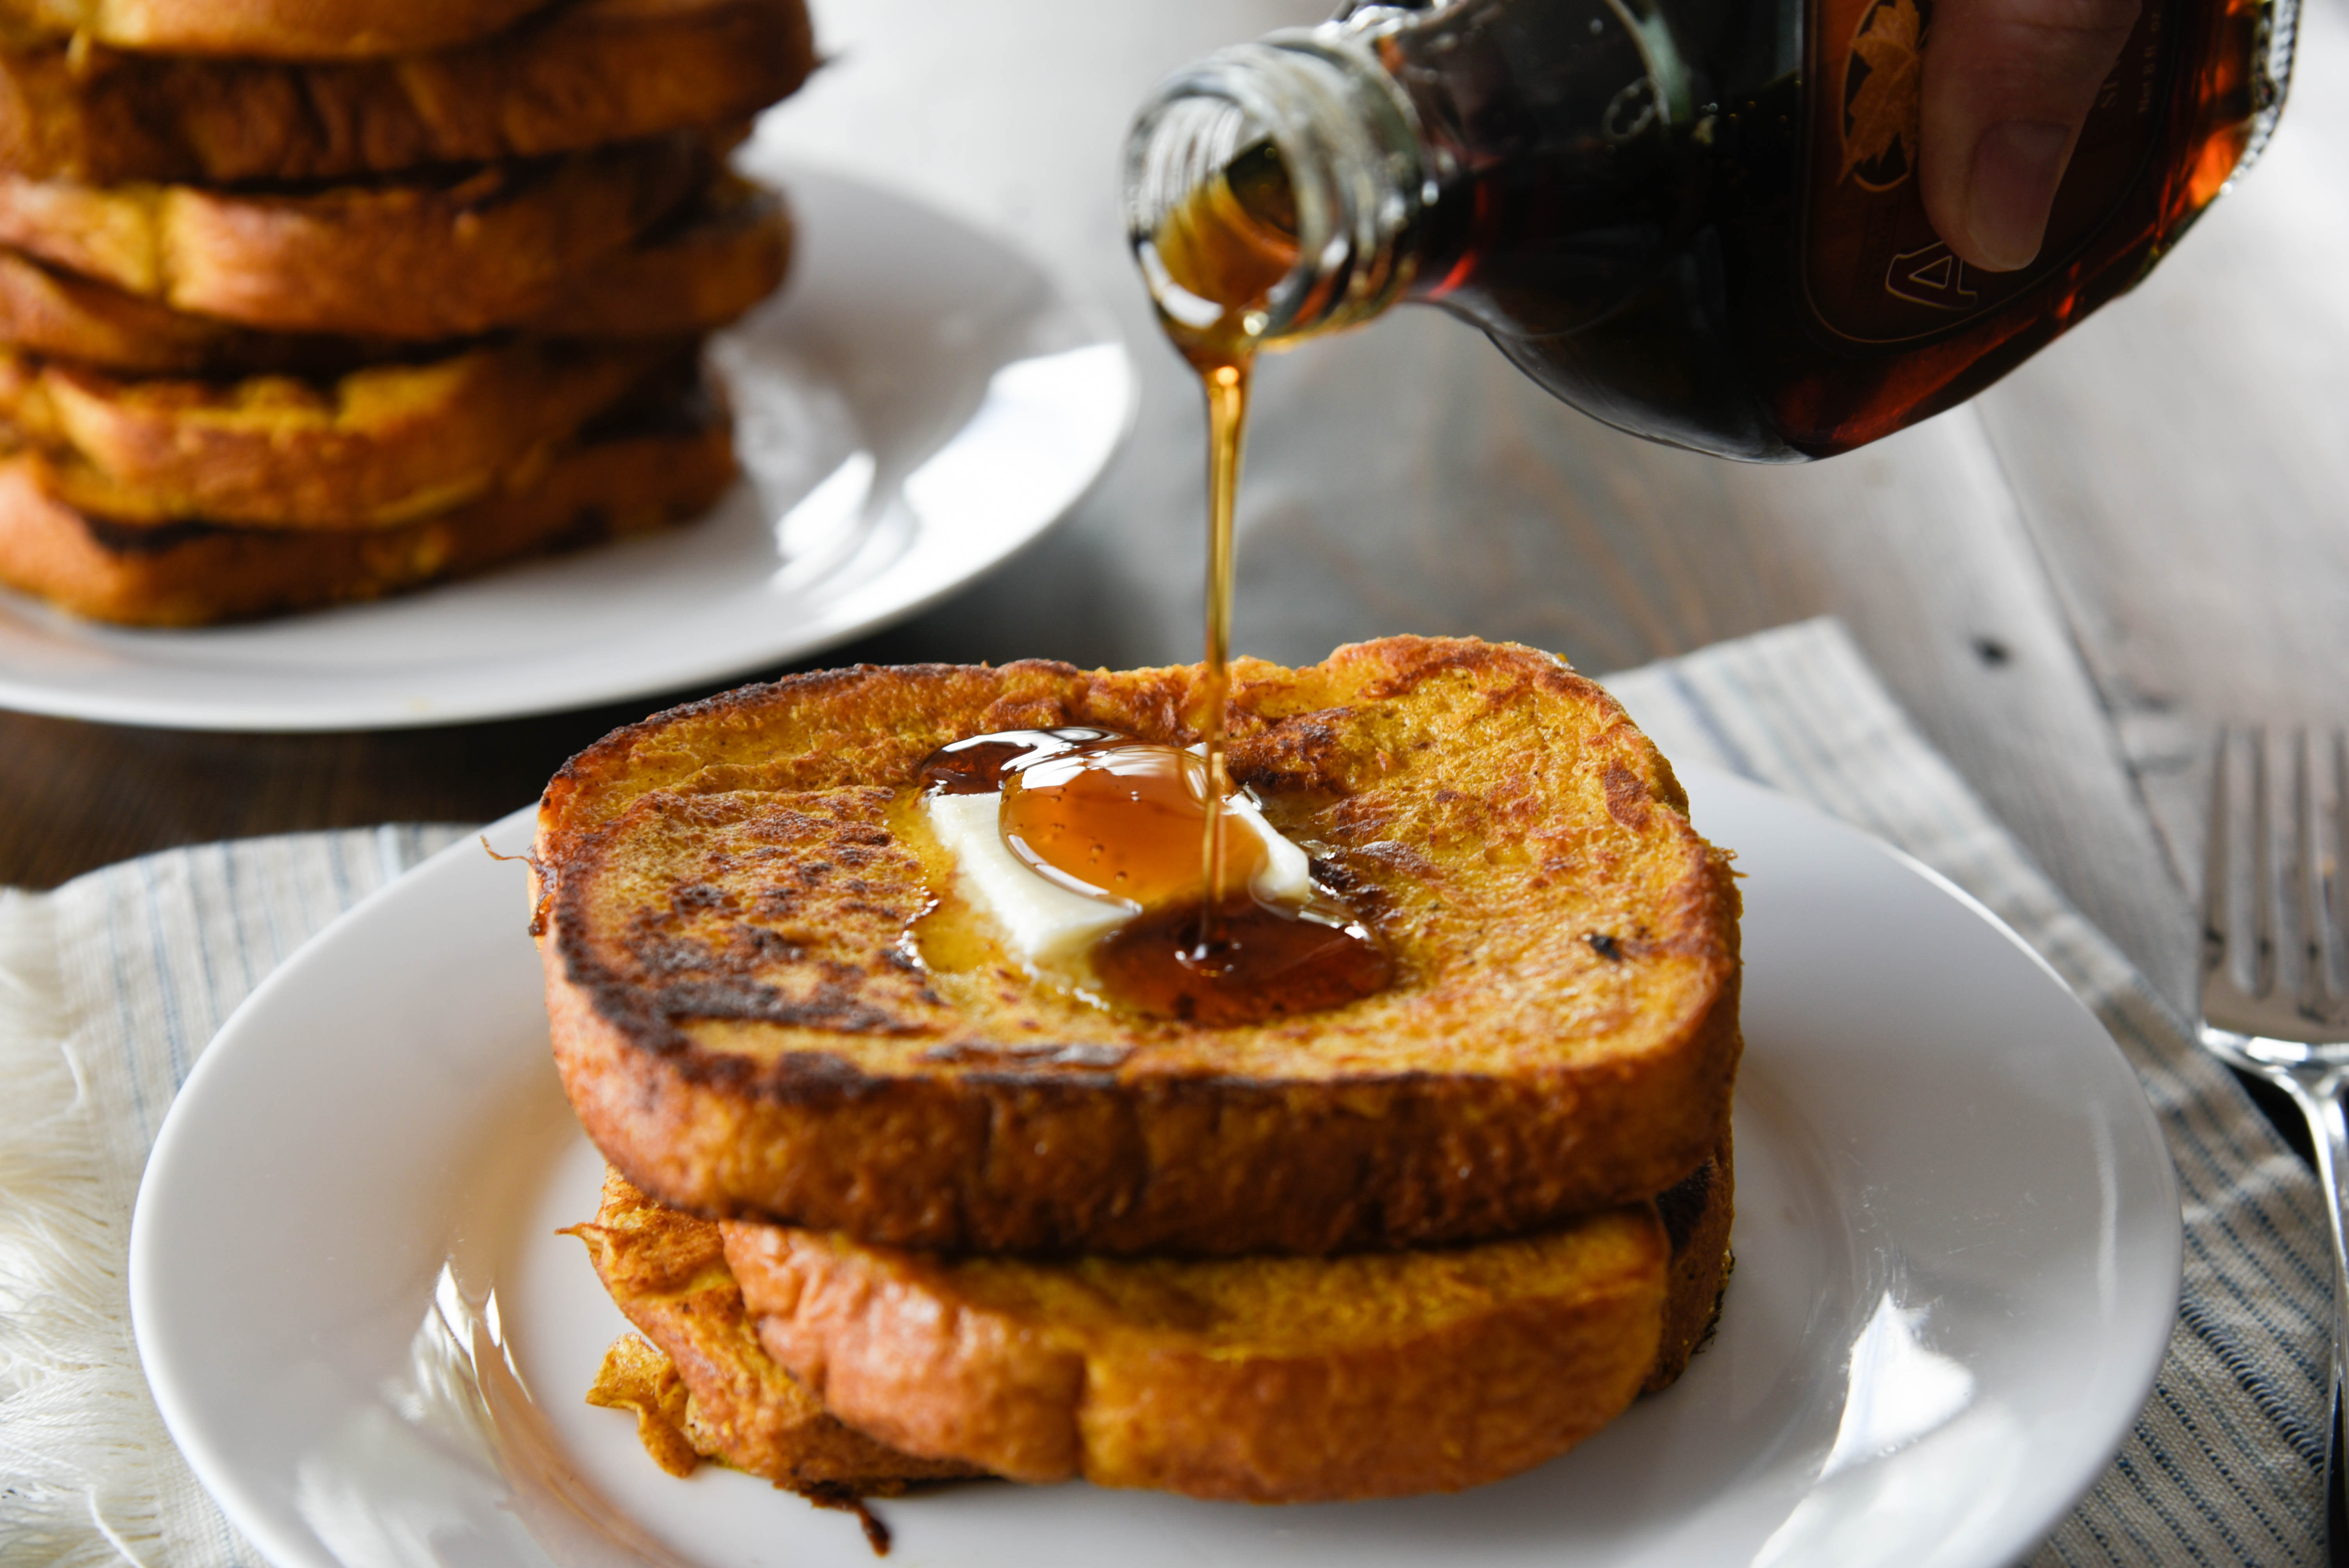 Syrup pouring over stack of French Toast